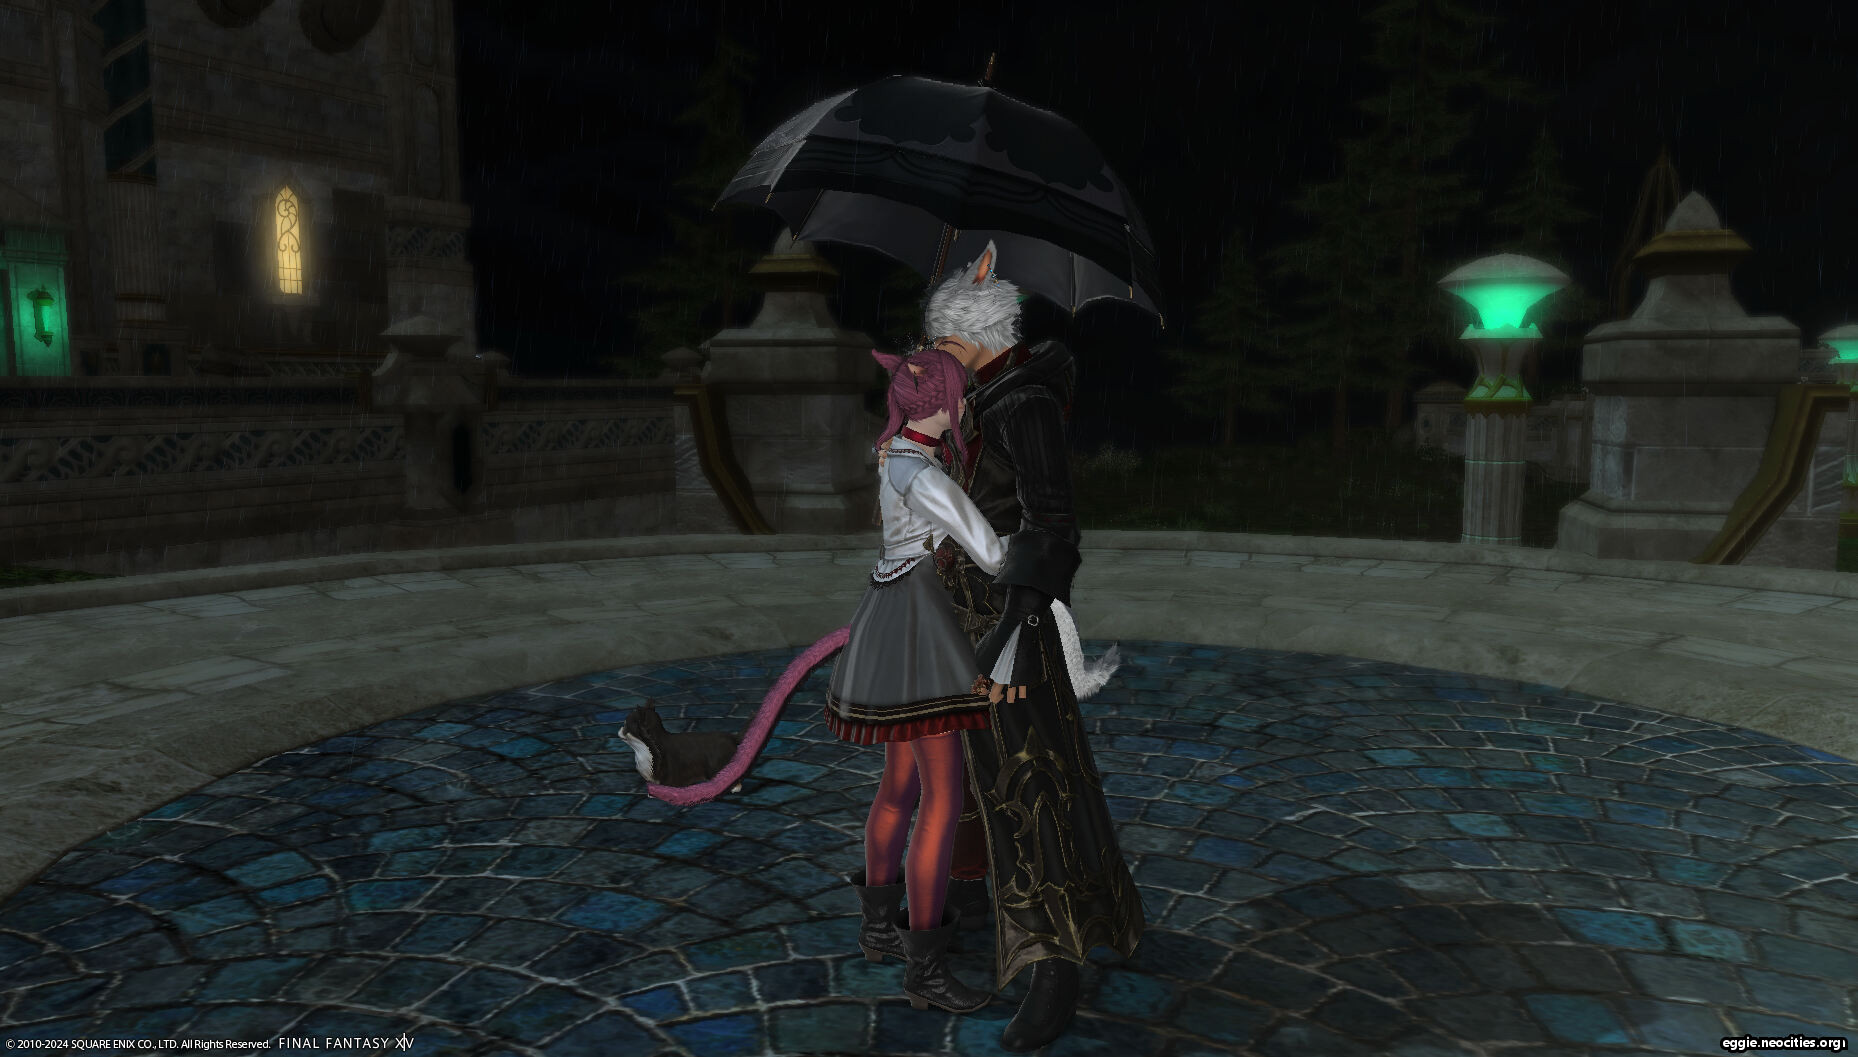 Zel hugging Xarale, who is holding a black umbrella. They are standing in Idyllshire